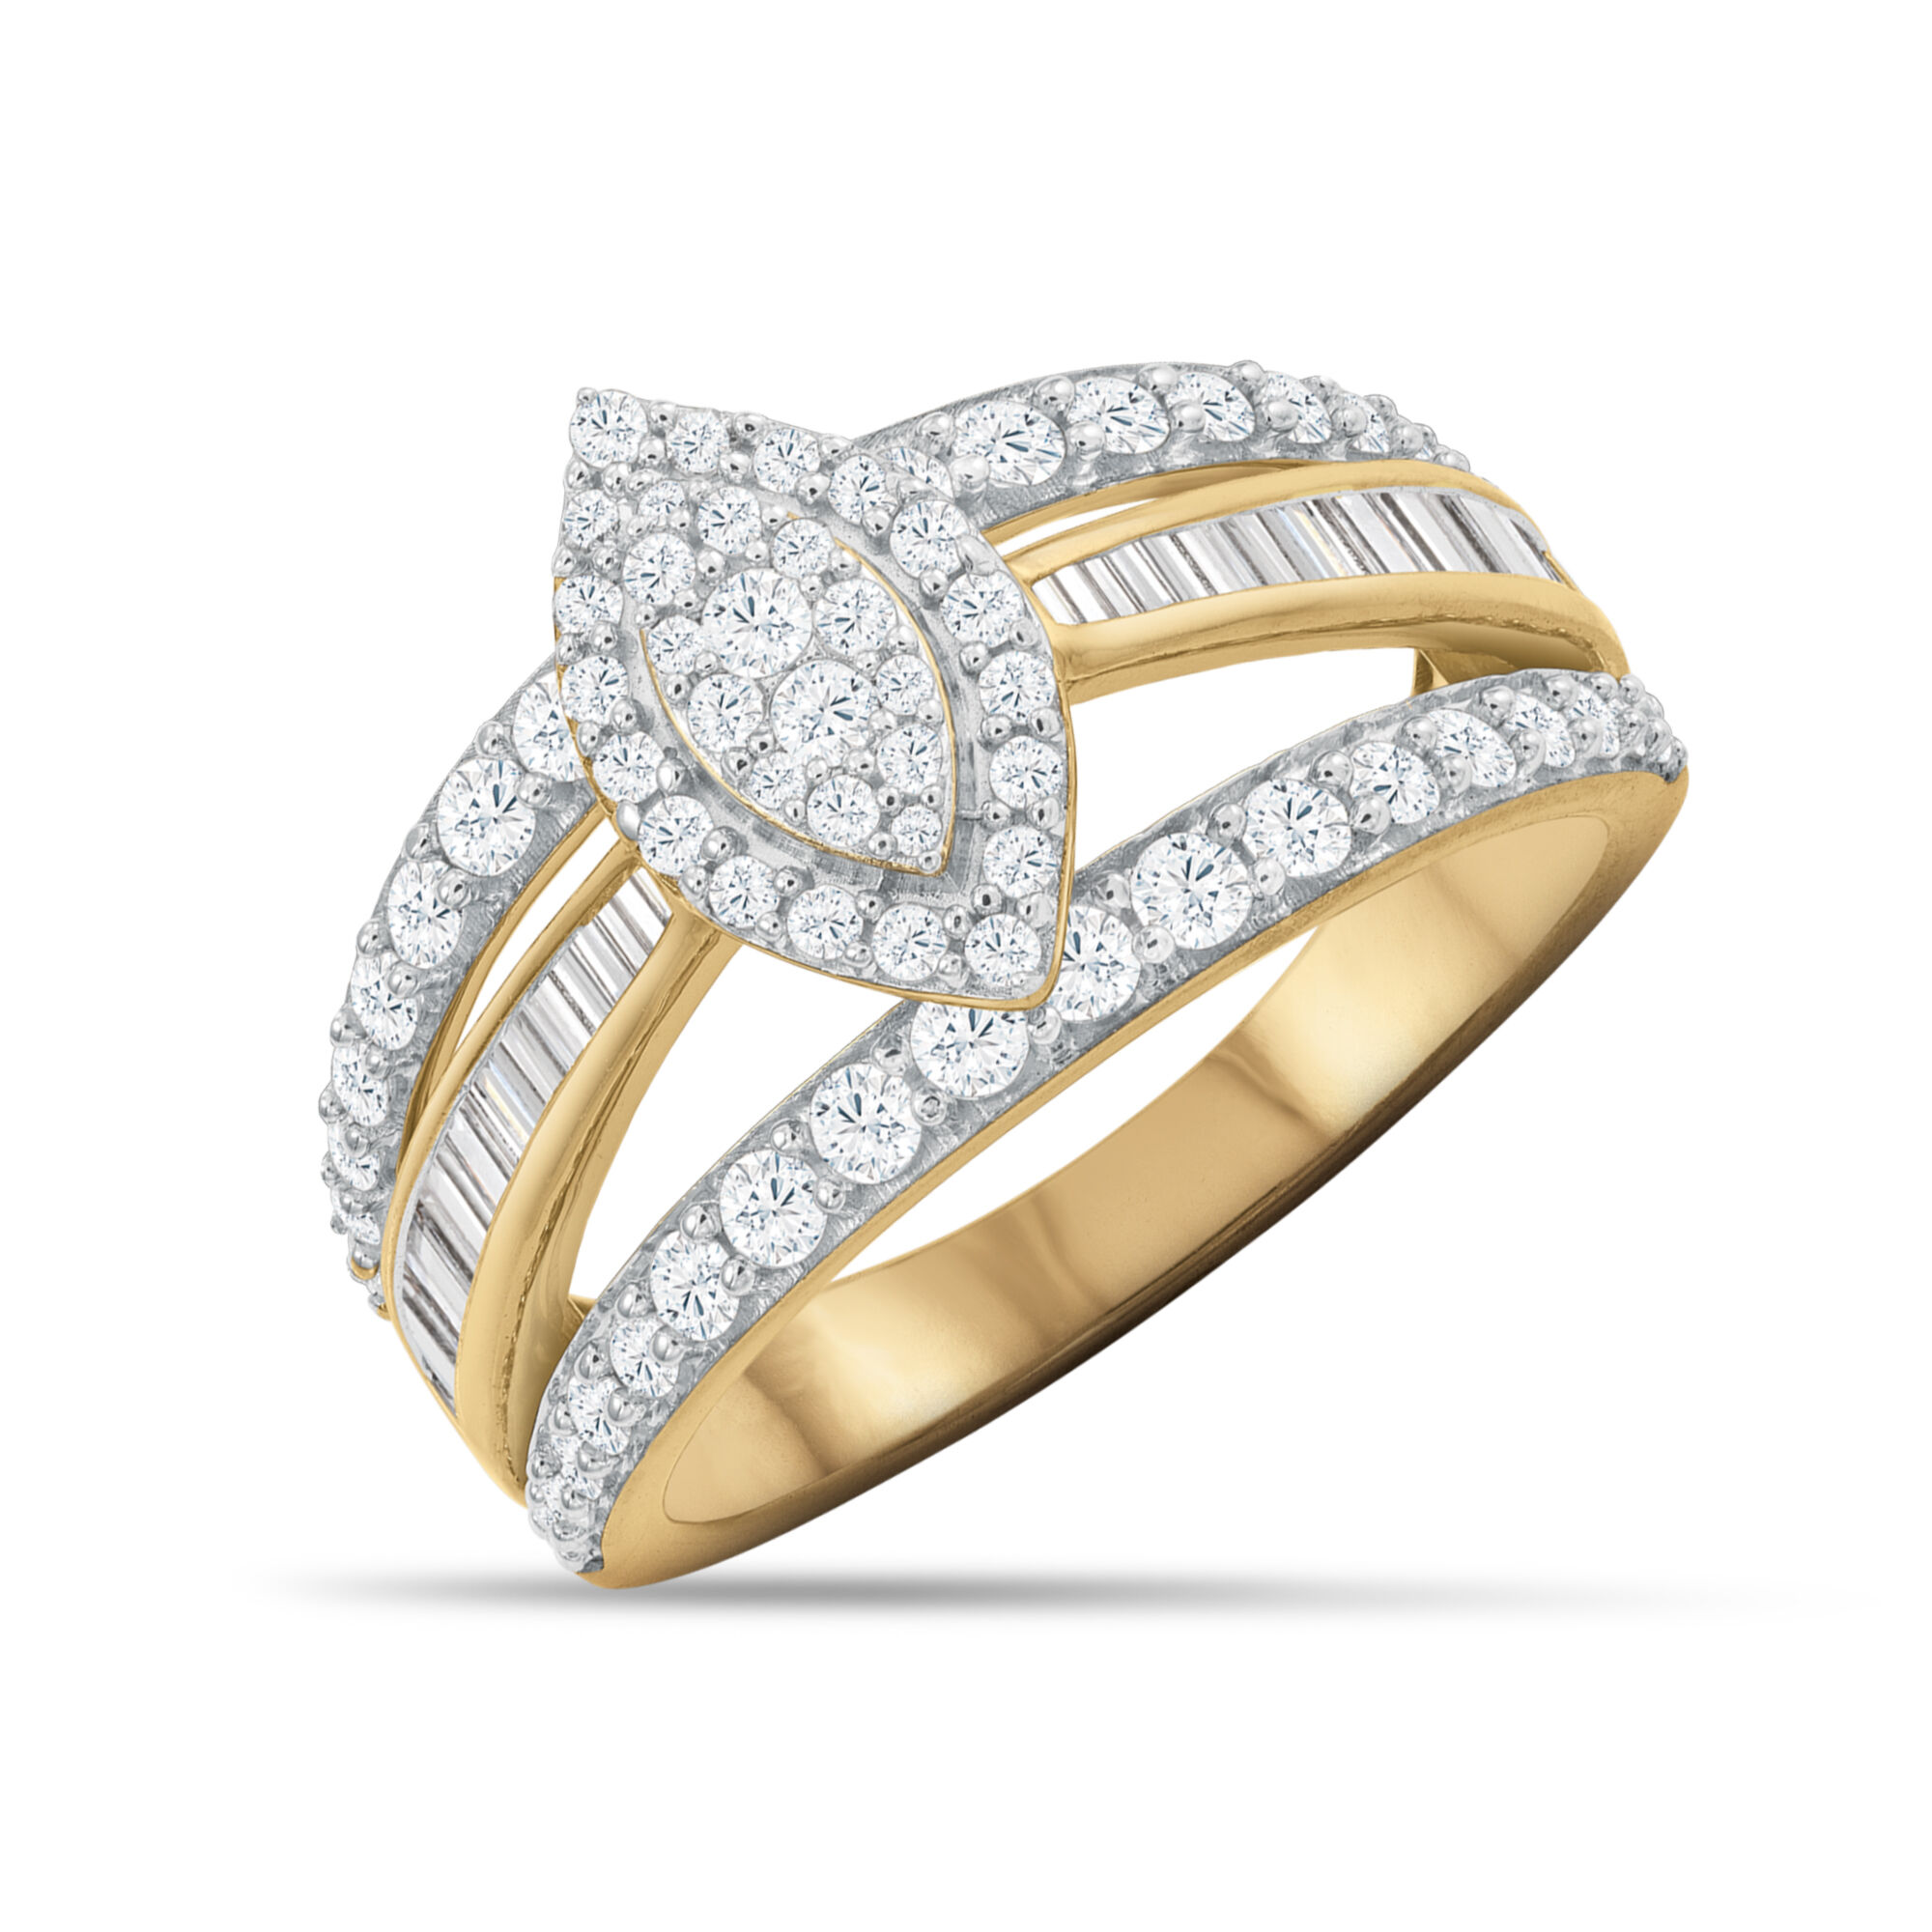 The One Hundred Diamond Ring 10924 0010 a main